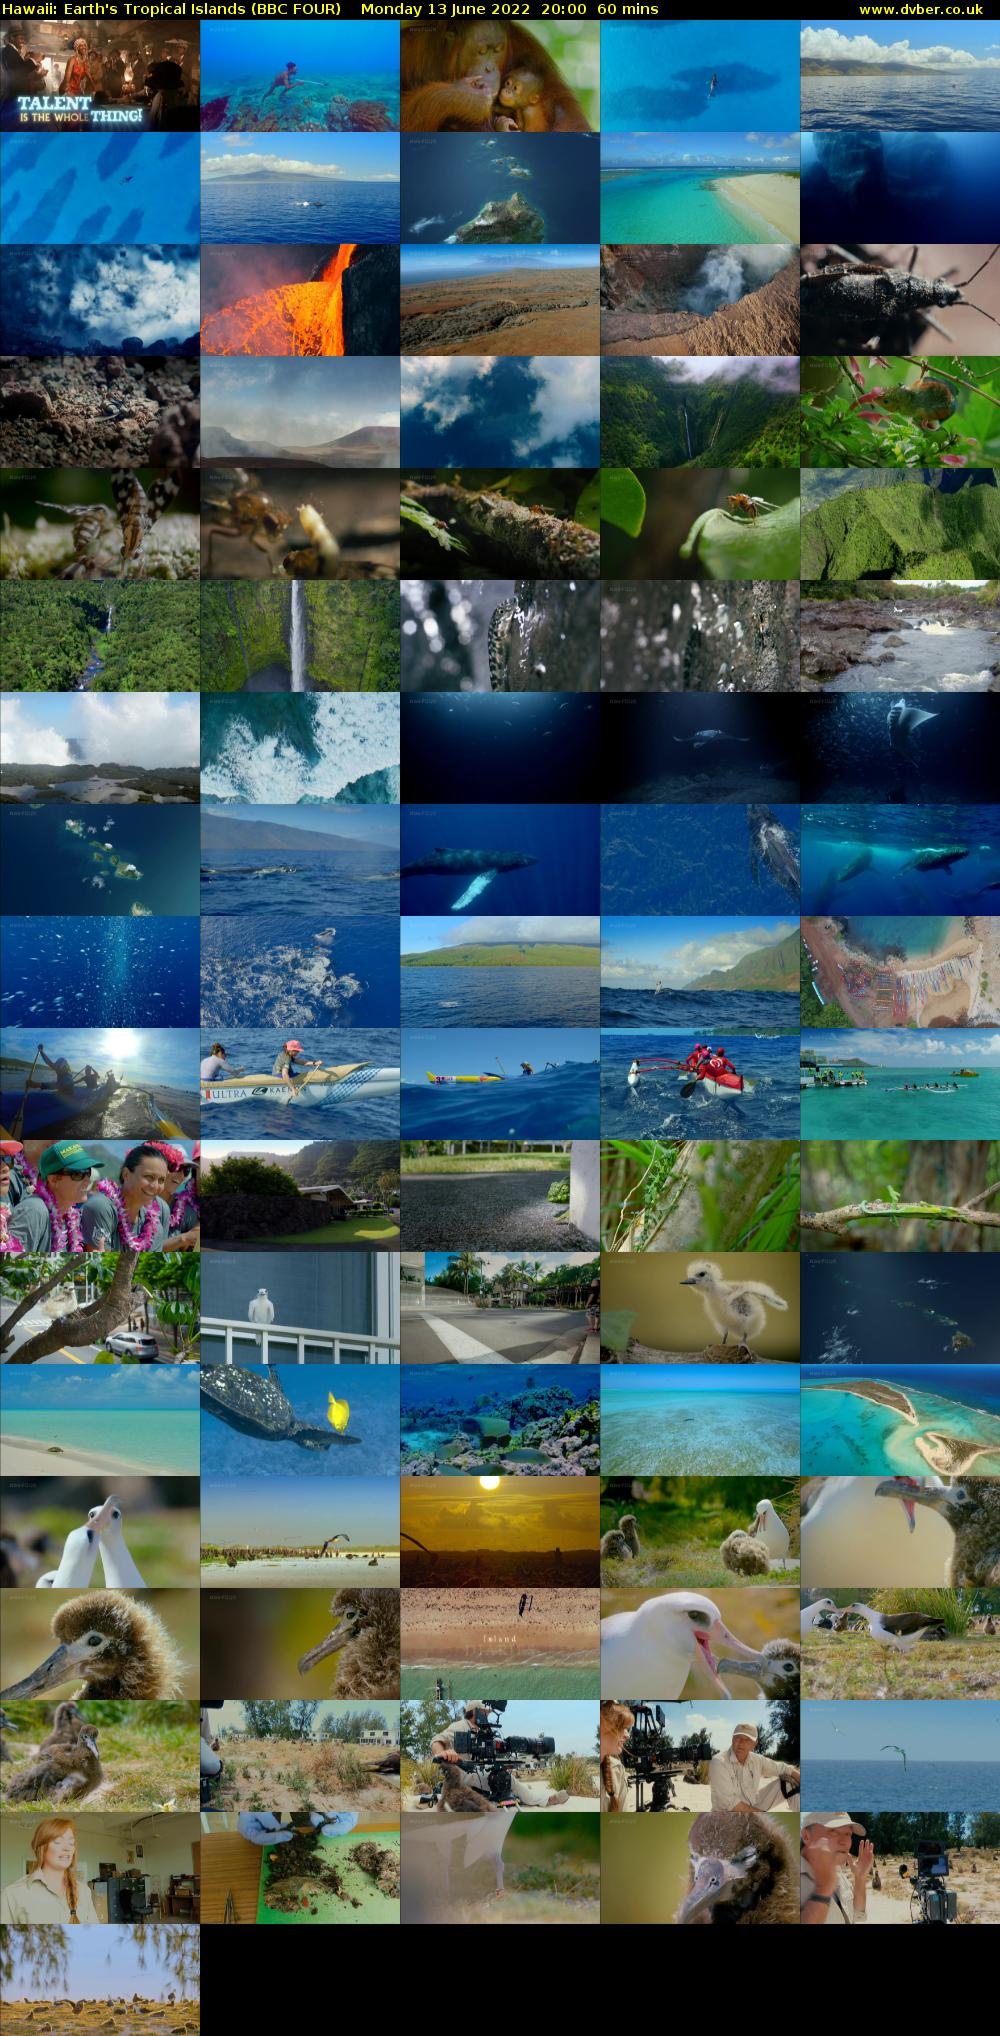 Hawaii: Earth's Tropical Islands (BBC FOUR) Monday 13 June 2022 20:00 - 21:00